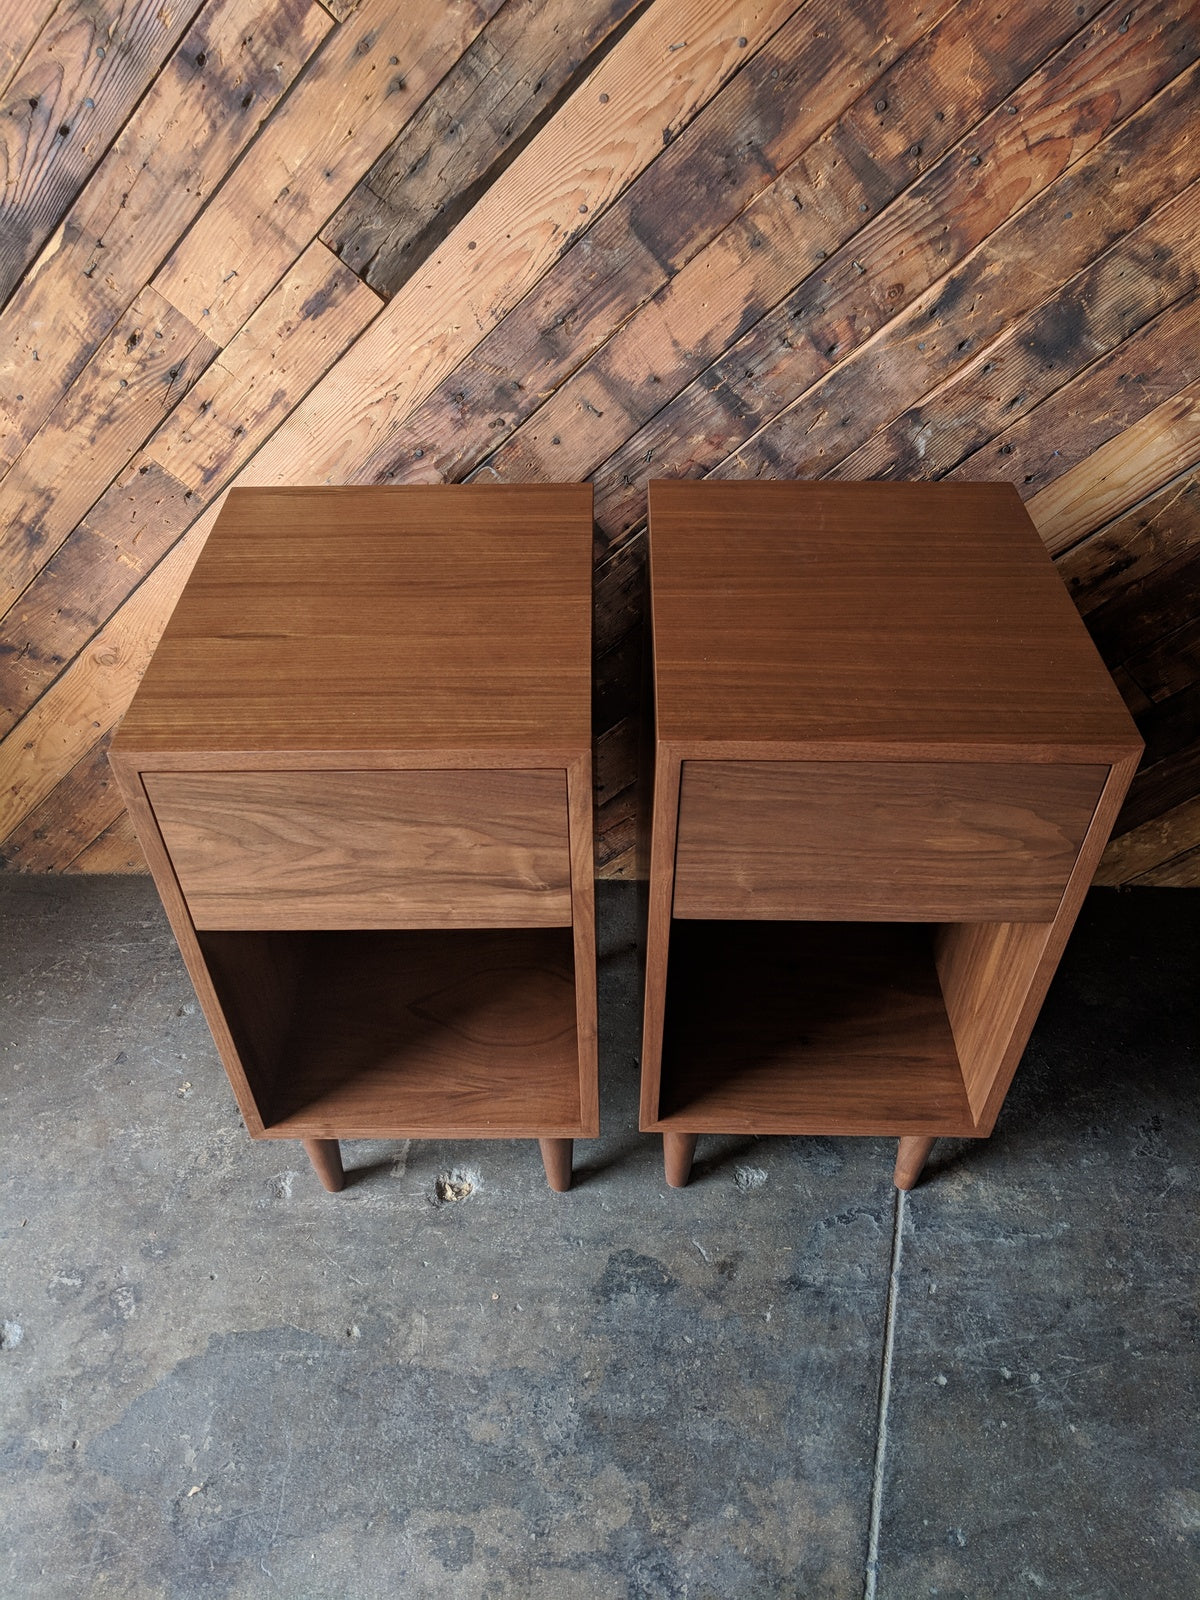 Custom Pair of mid century style night stands, very tall and with large drawer